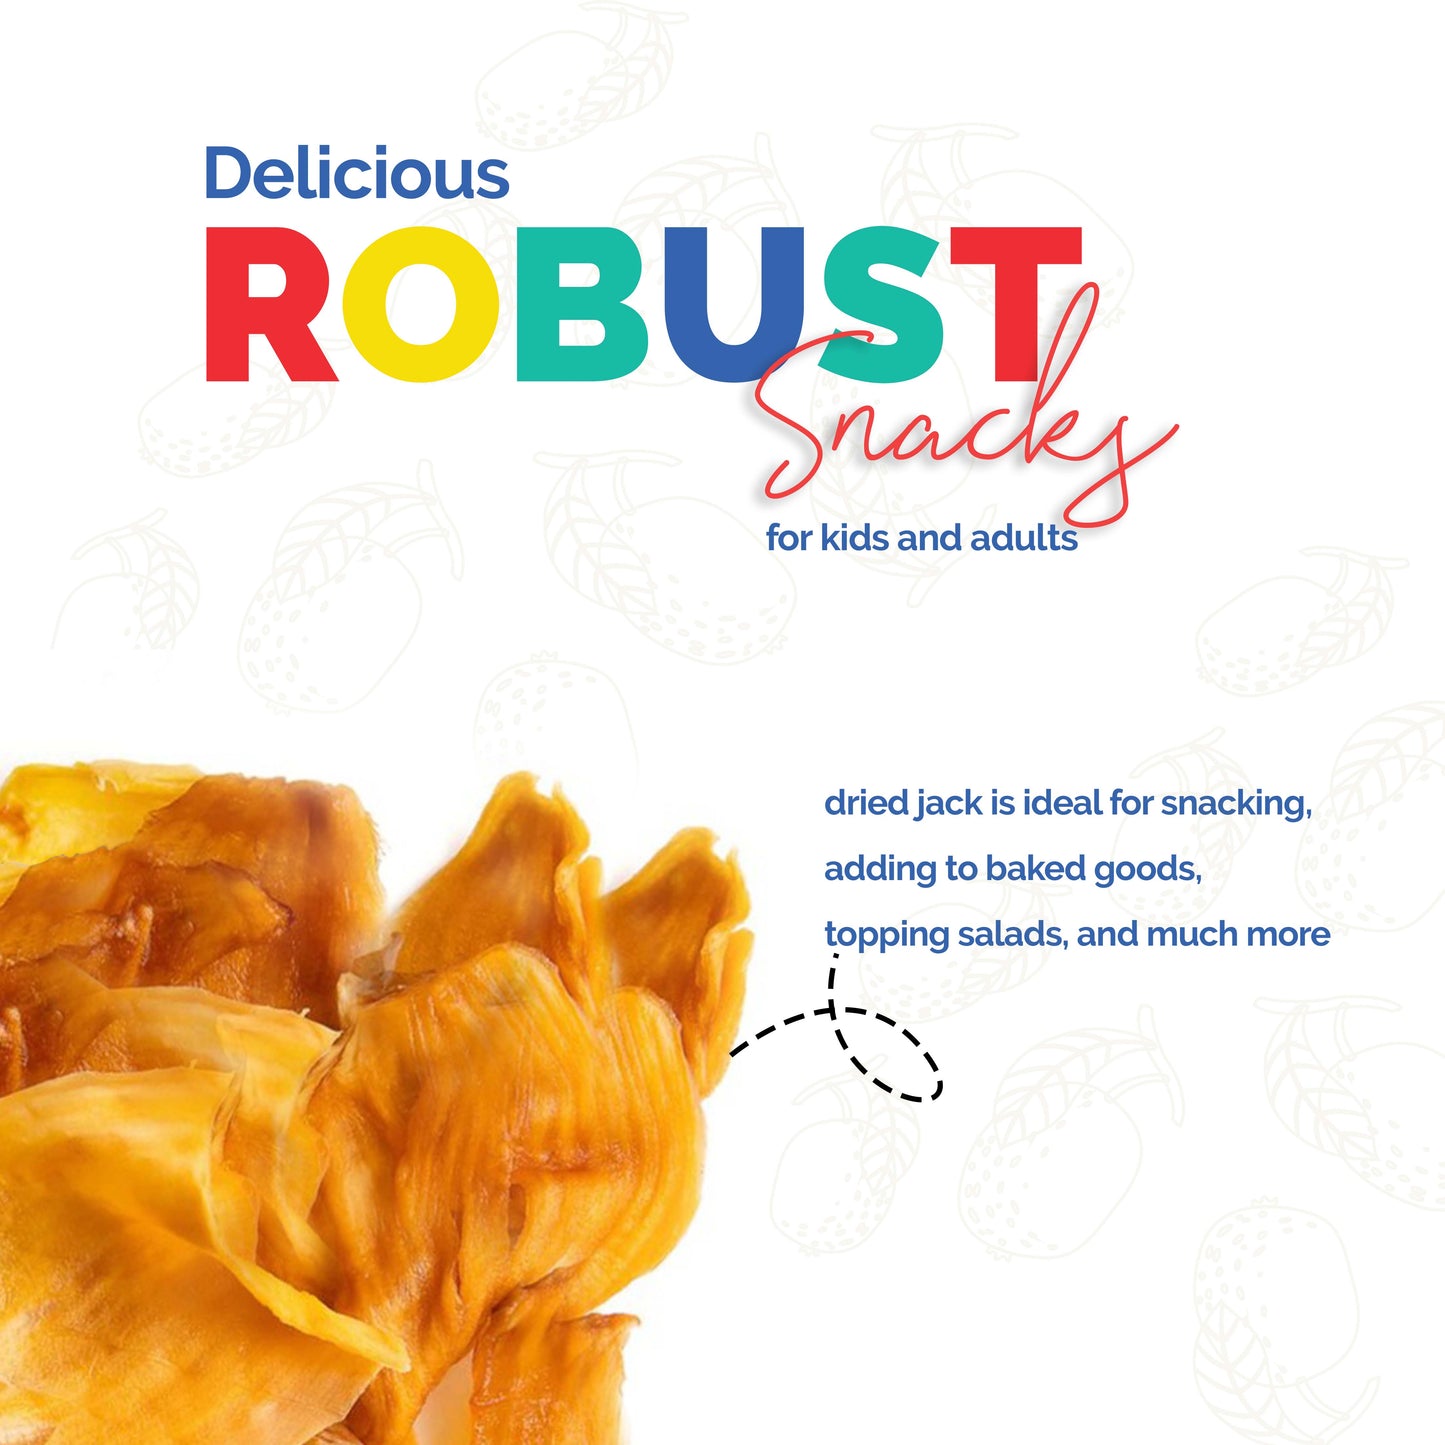 
                  
                    Delicious Robust jackfruit snacks : Dried jackfruit is ideal for snacking adding to baked goods, topping salads and much more
                  
                